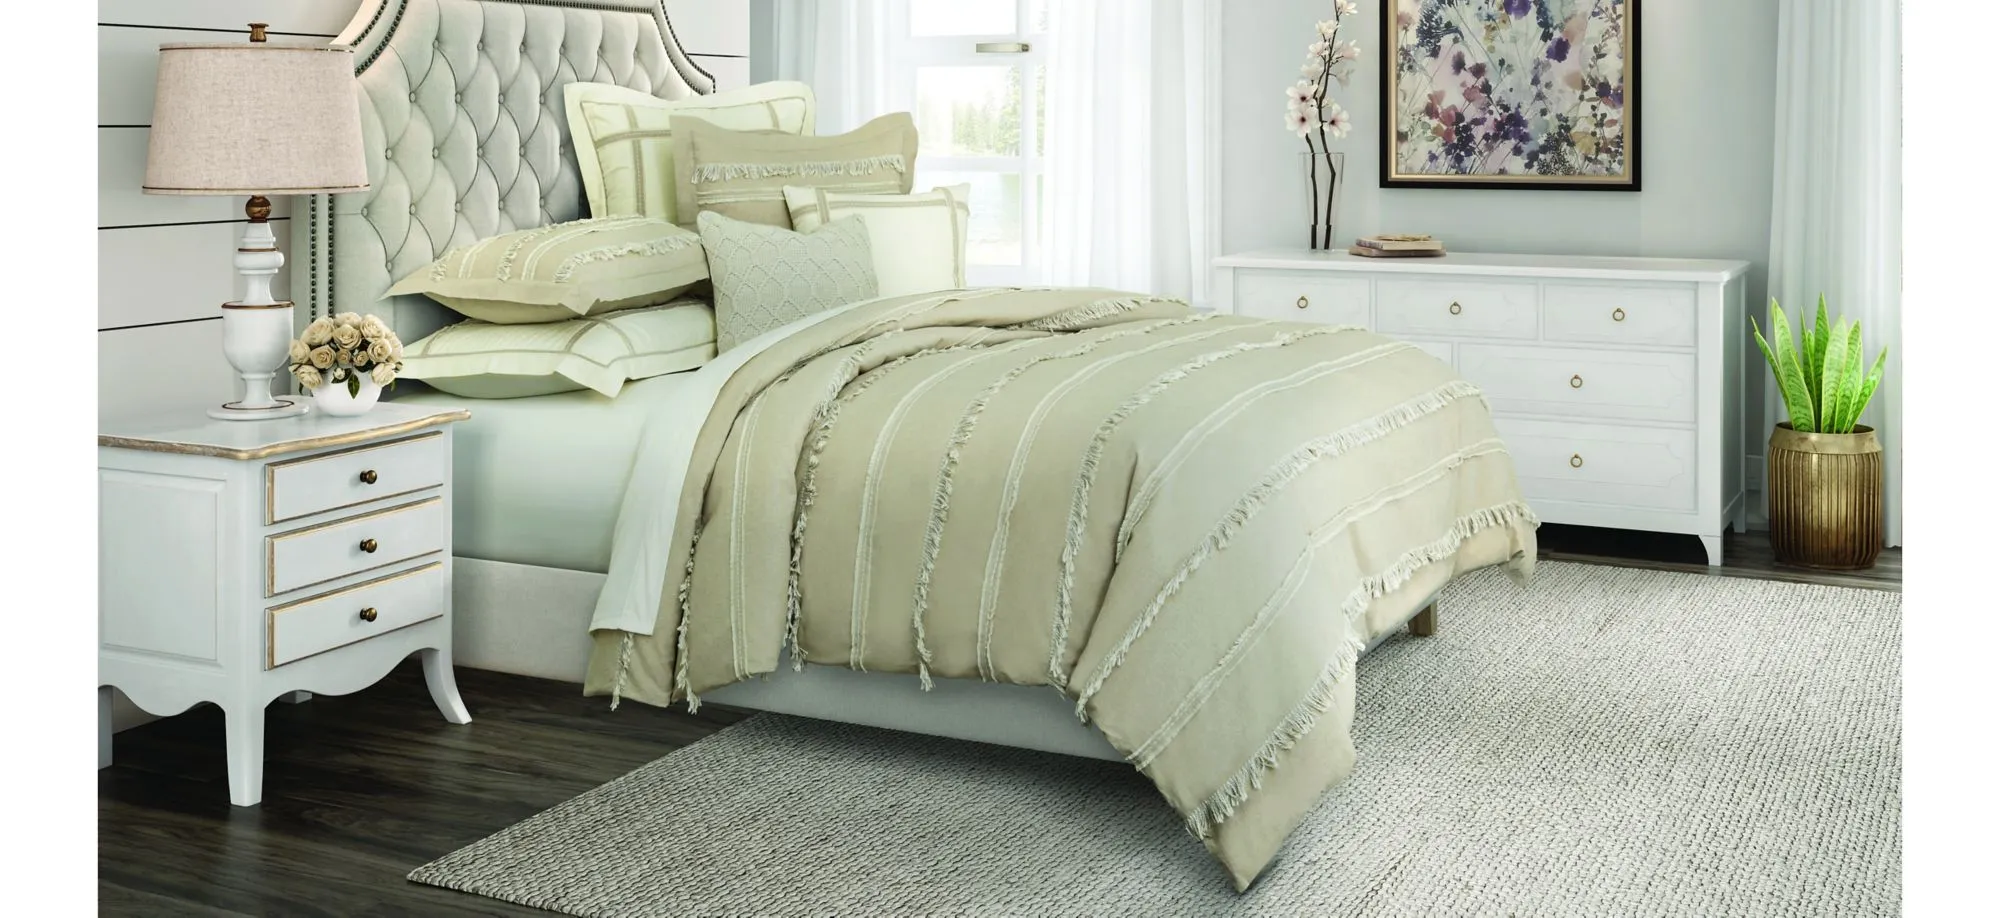 Country Lane 8-Piece Duvet Set in Tan, Natural by Amini Innovation